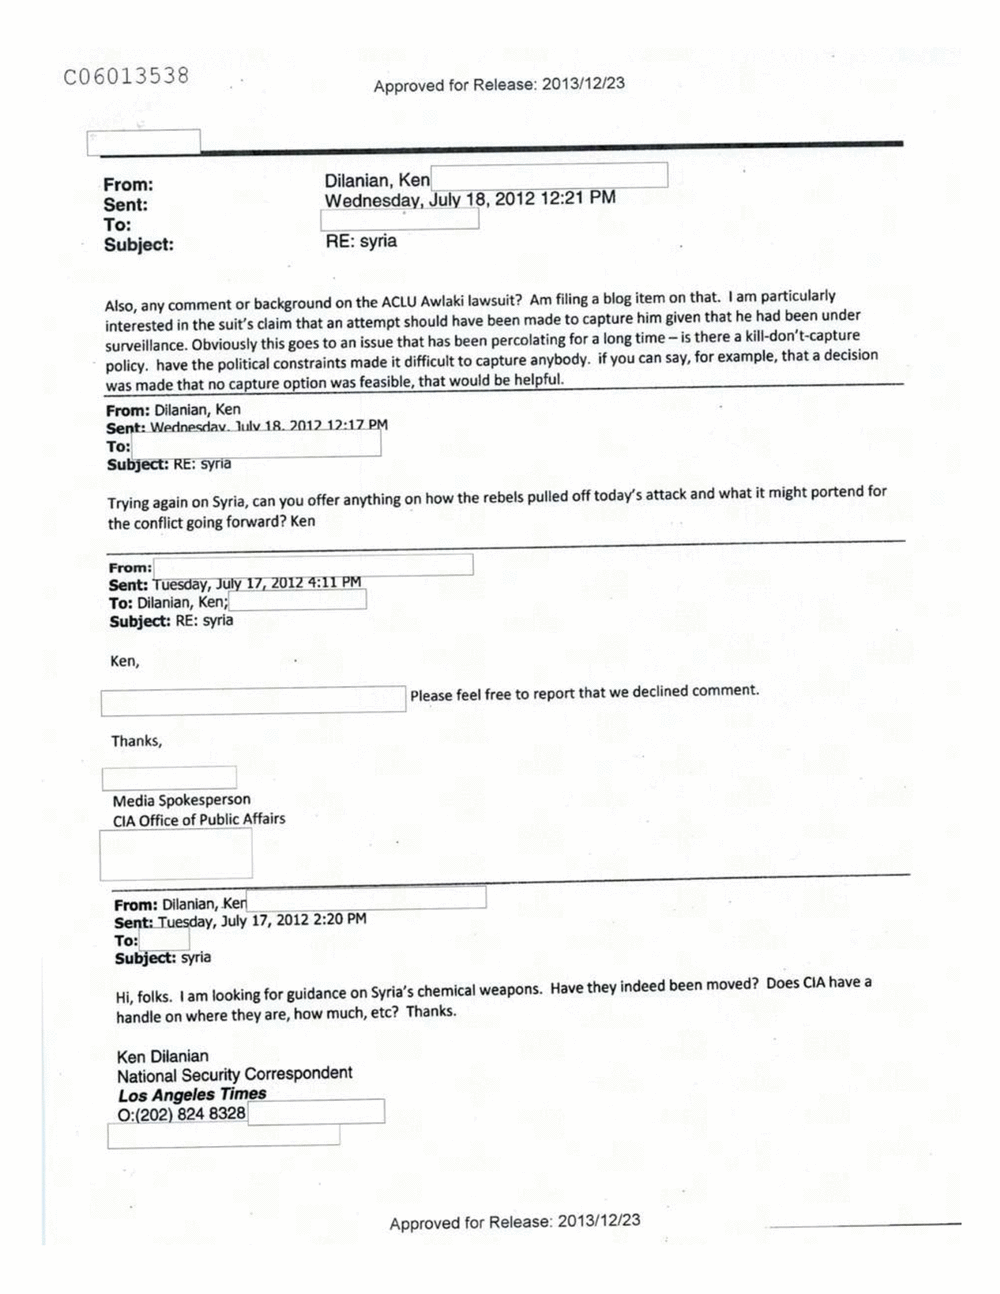 Page 392 from Email Correspondence Between Reporters and CIA Flacks